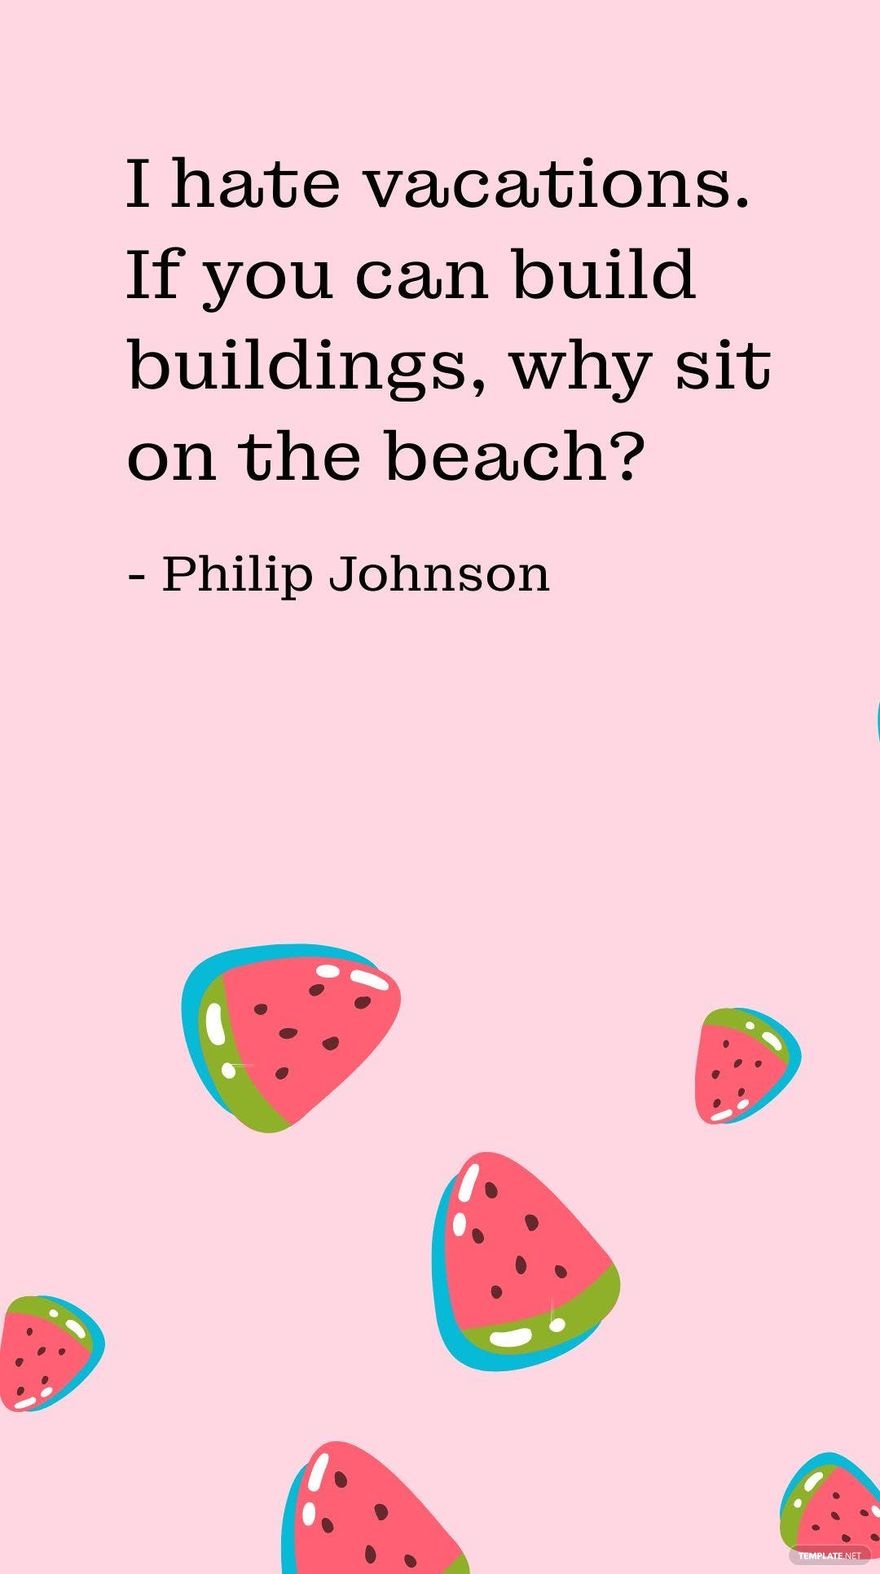 Free Philip Johnson - I hate vacations. If you can build buildings, why sit on the beach? in JPG